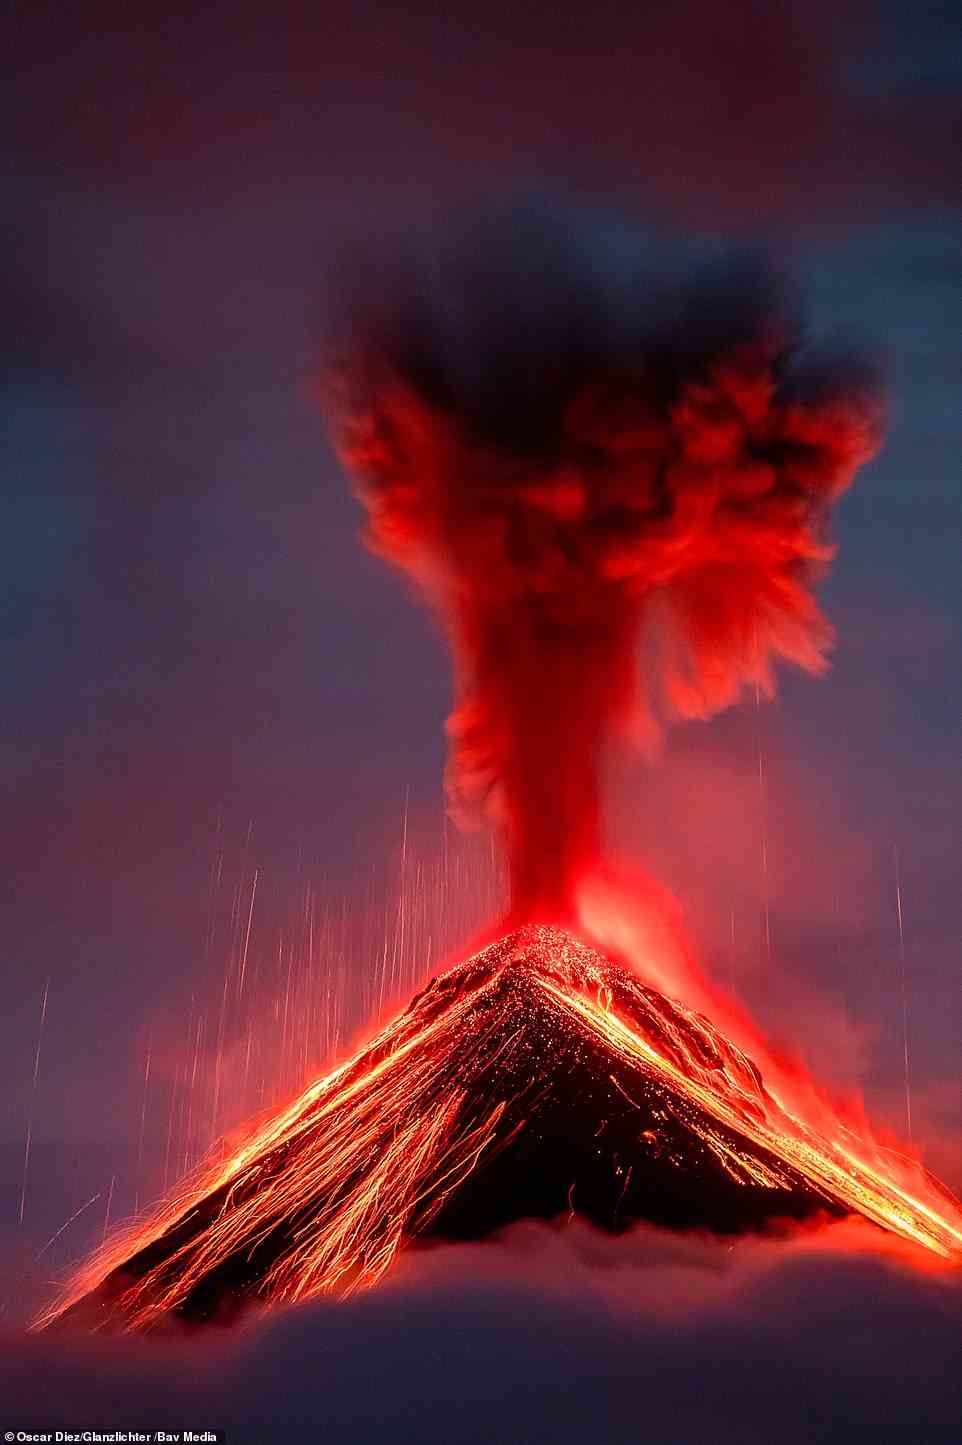 Spaniard Oscar Diez spotted this volcanic eruption in terrifying real time in April 2021. The Acatenango volcano in Guatemala, central America is one of the region's highest peaks - and a fiery cauldron. Diez sat tight till the evening so the dark grey sky, scarlet smoke and glowing red lava would make for a stark visual contrast. It was worth the wait.